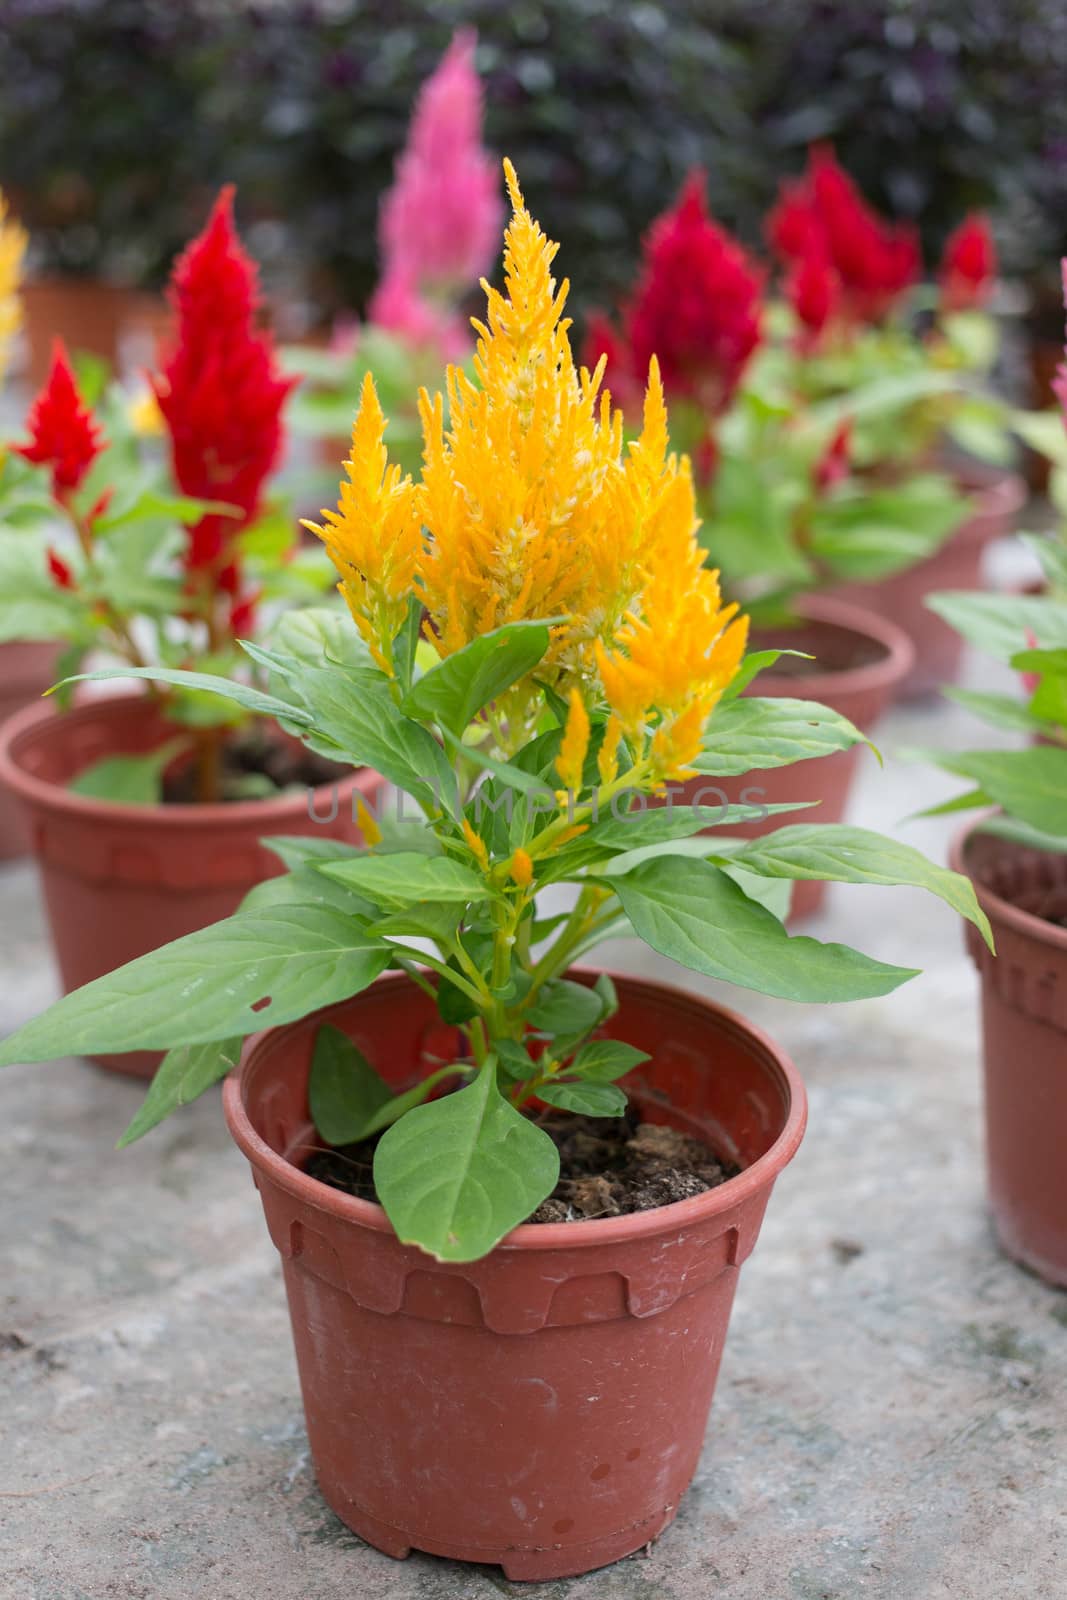 Plumed celosia, Wool flower, Red fox many color in pot